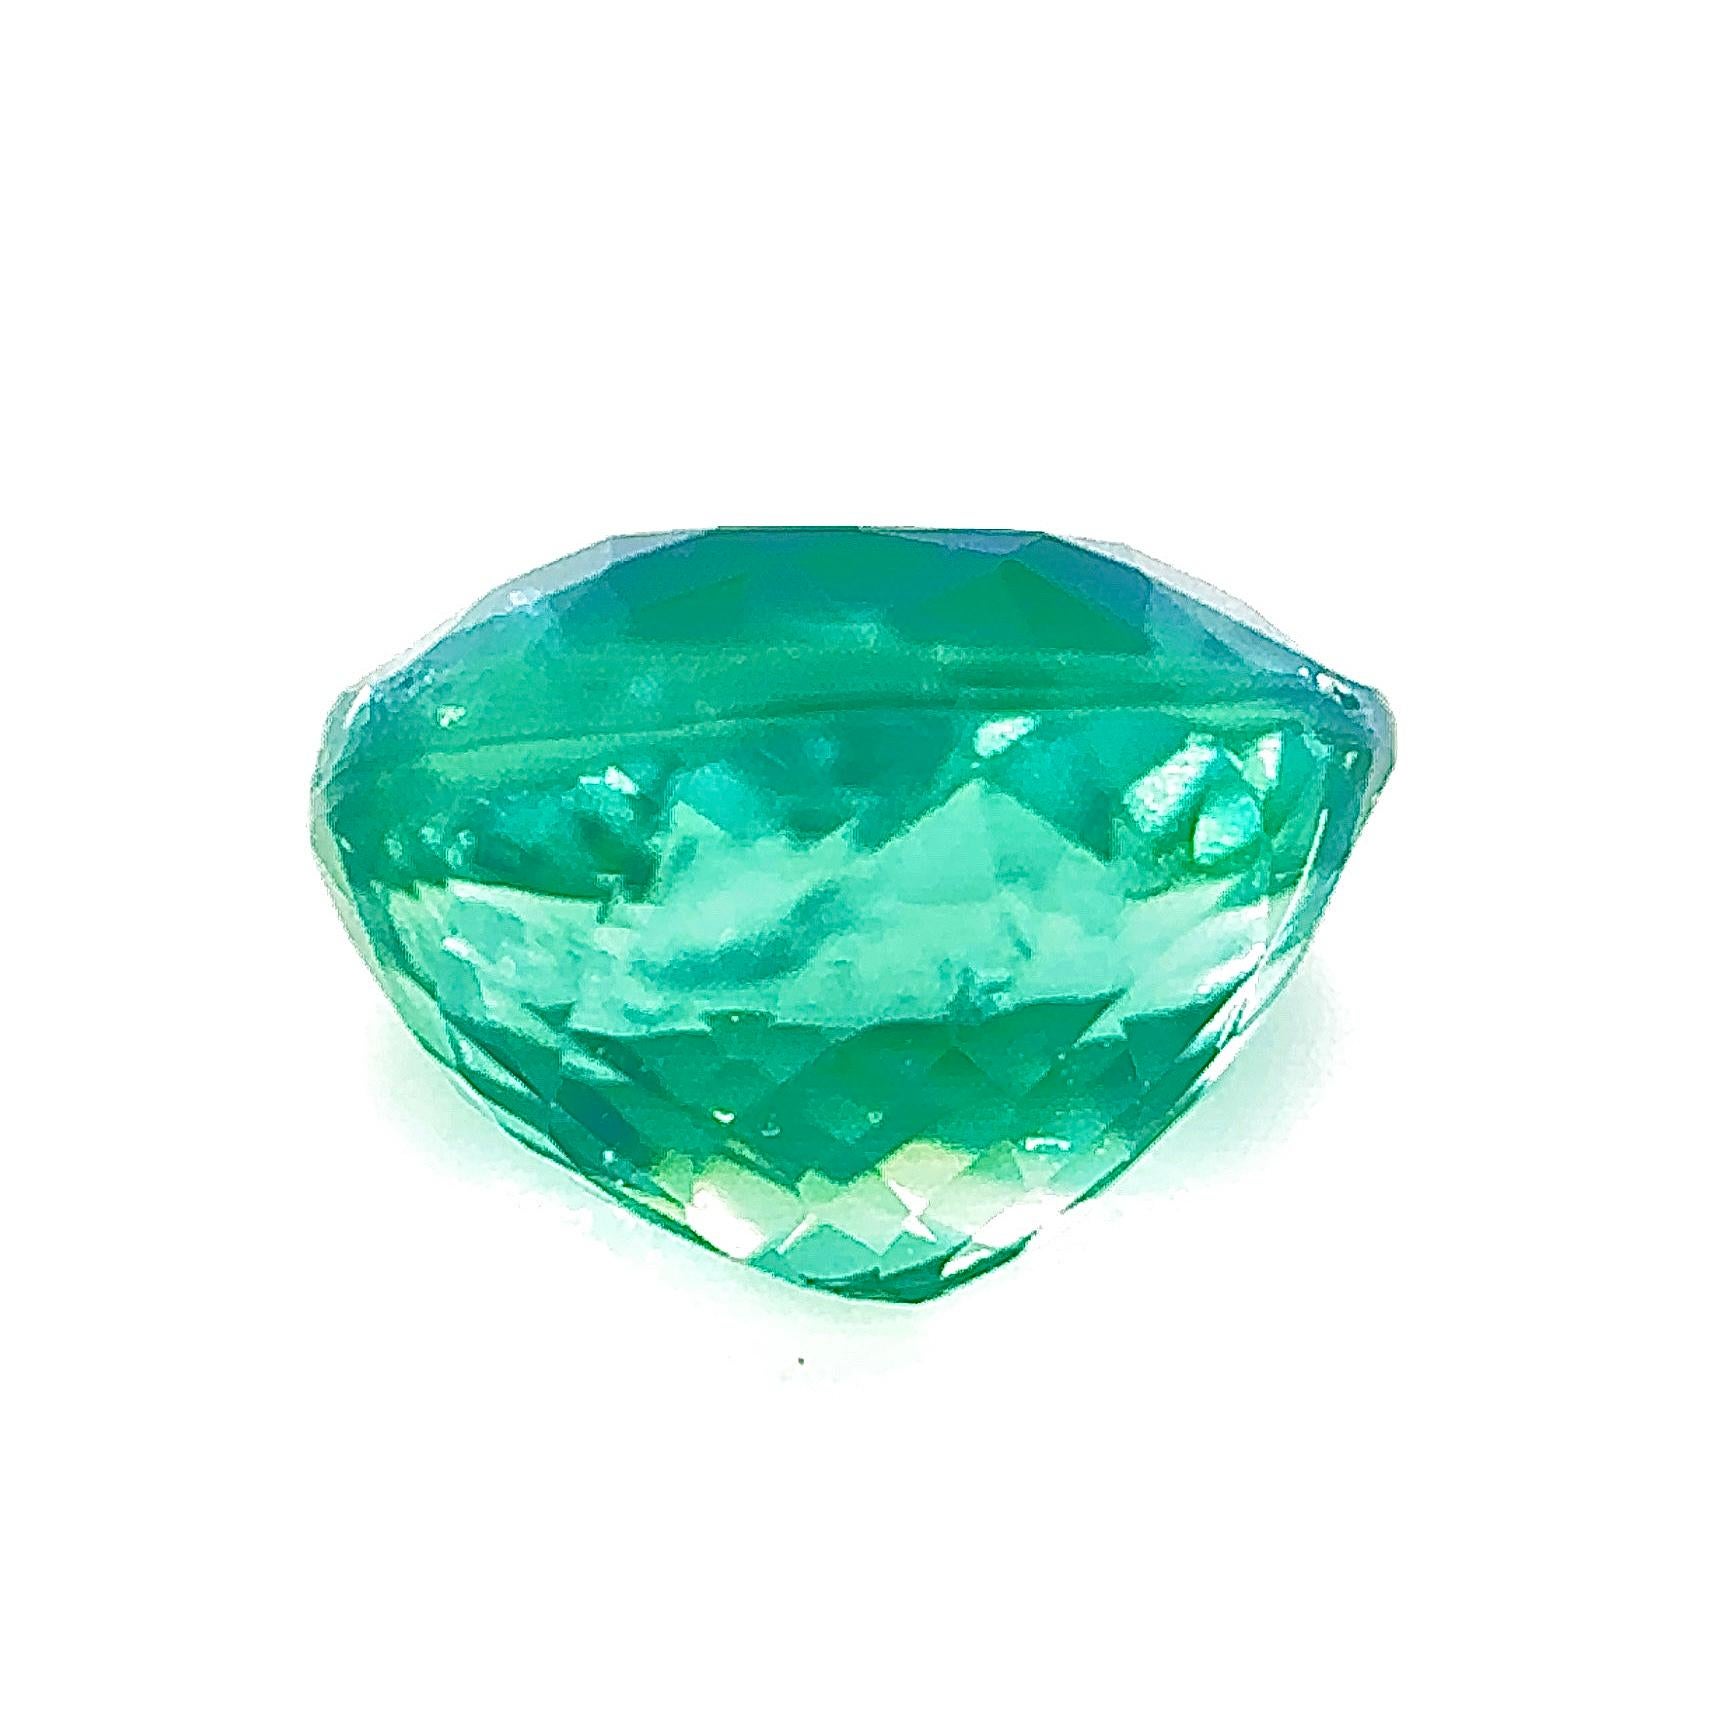 1.20 Carat Paraiba Tourmaline Loose stone in Nylon Green  and Blue 

Website video uploading might be slow; message us for more details.

GRS/GCS/GIA appointed lab certificate can be arranged upon request

To design your own jewellery, Xuelai